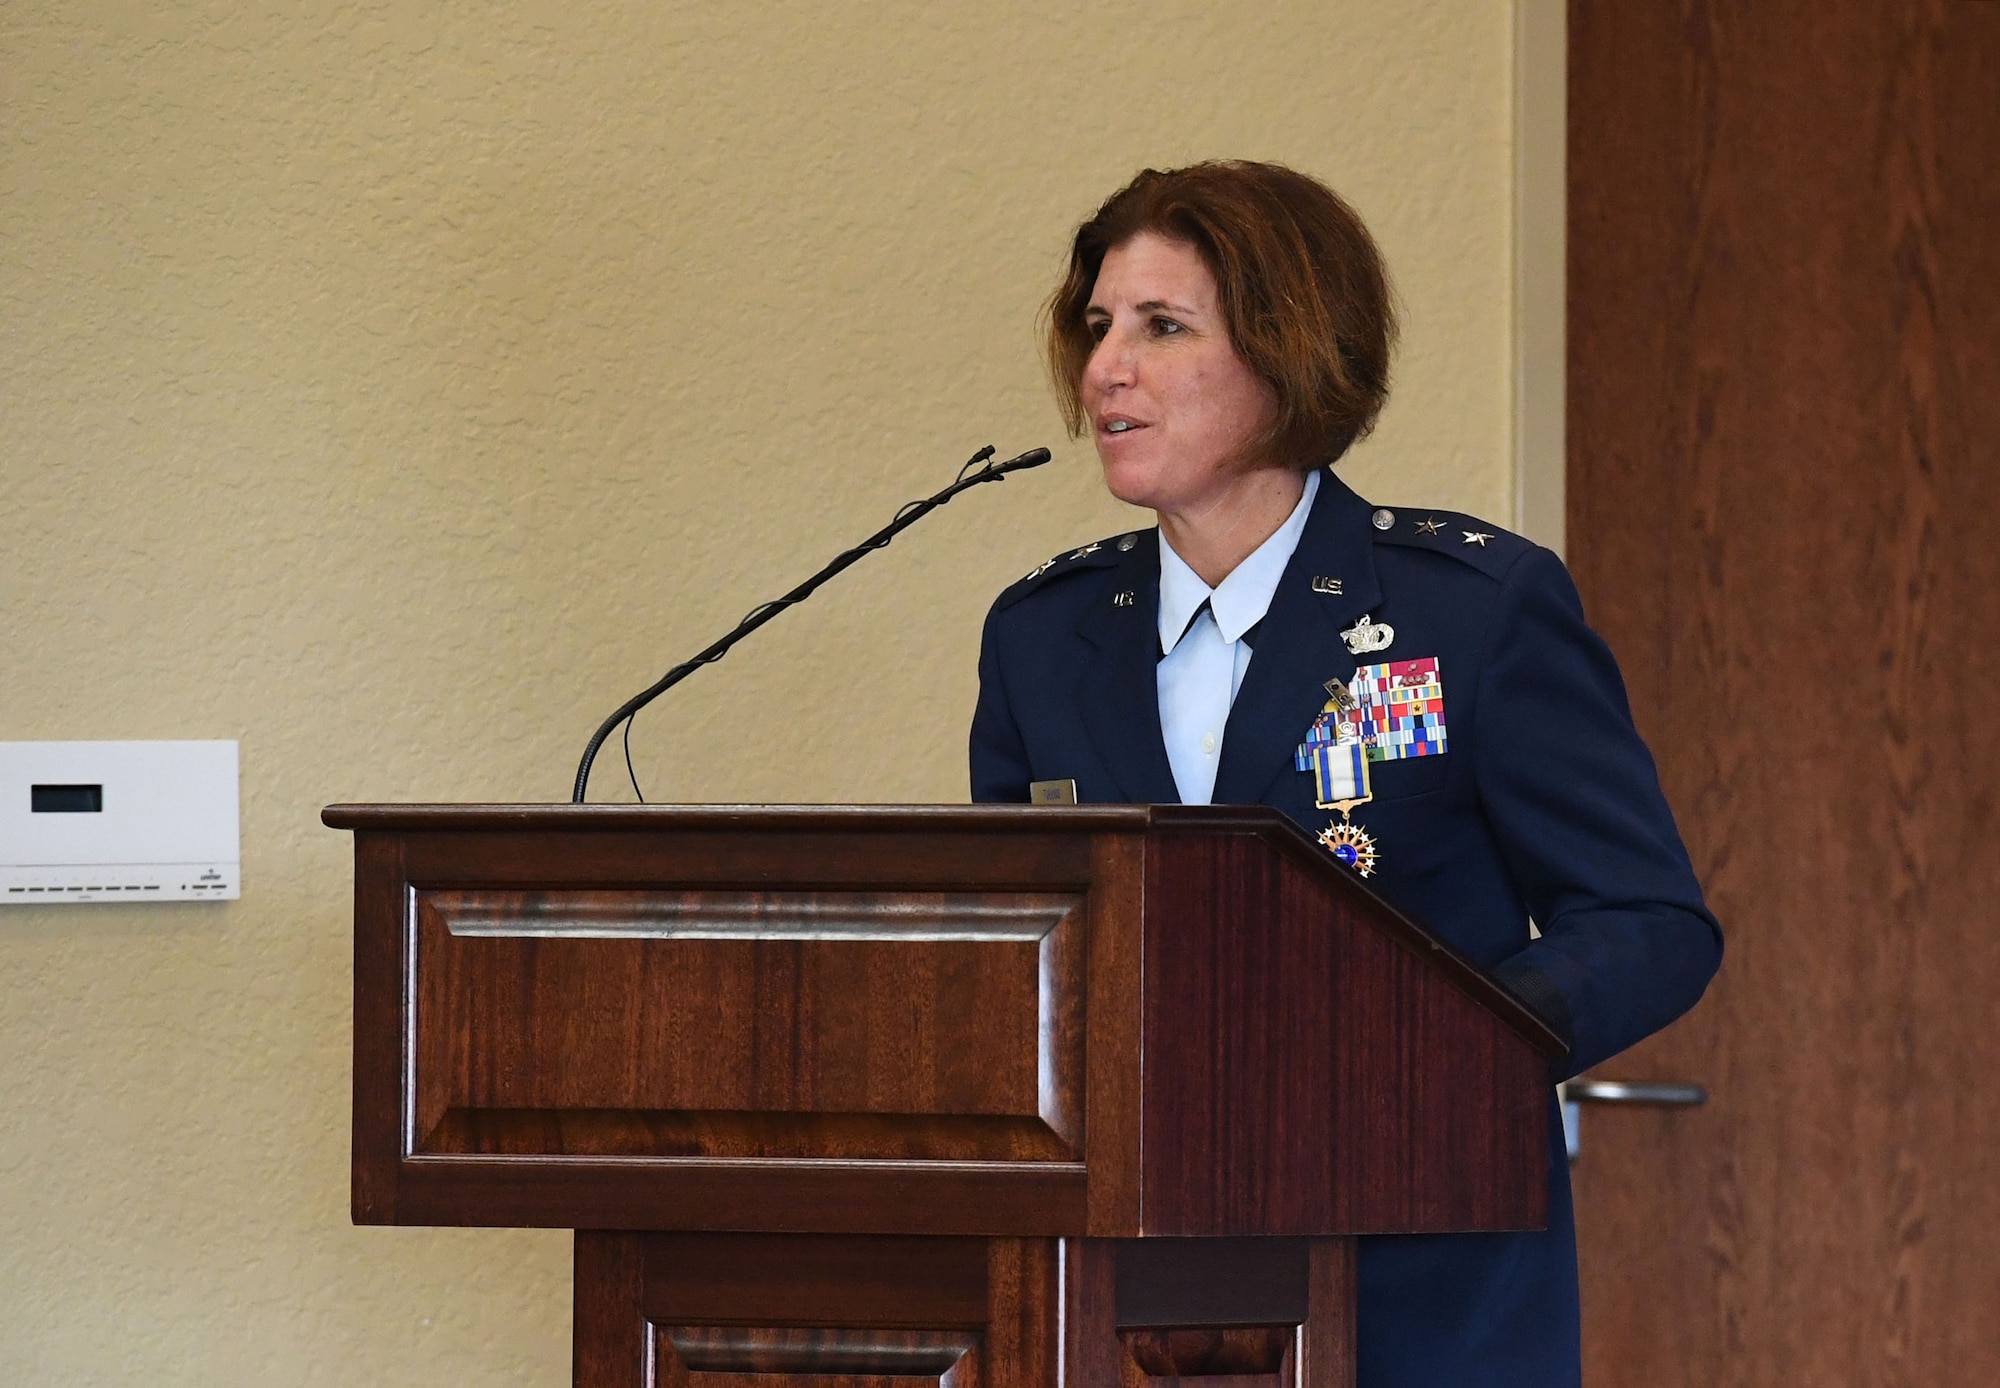 U.S. Air Force Maj. Gen. Andrea Tullos, Second Air Force commander, delivers remarks during the Second Air Force change of command ceremony inside the Bay Breeze Event Center at Keesler Air Force Base, Mississippi, July 30, 2021. The ceremony is a symbol of command being exchanged from one commander to the next. Tullos relinquished command of the Second Air Force to Maj. Gen. Michele Edmondson. (U.S. Air Force photo by Kemberly Groue)